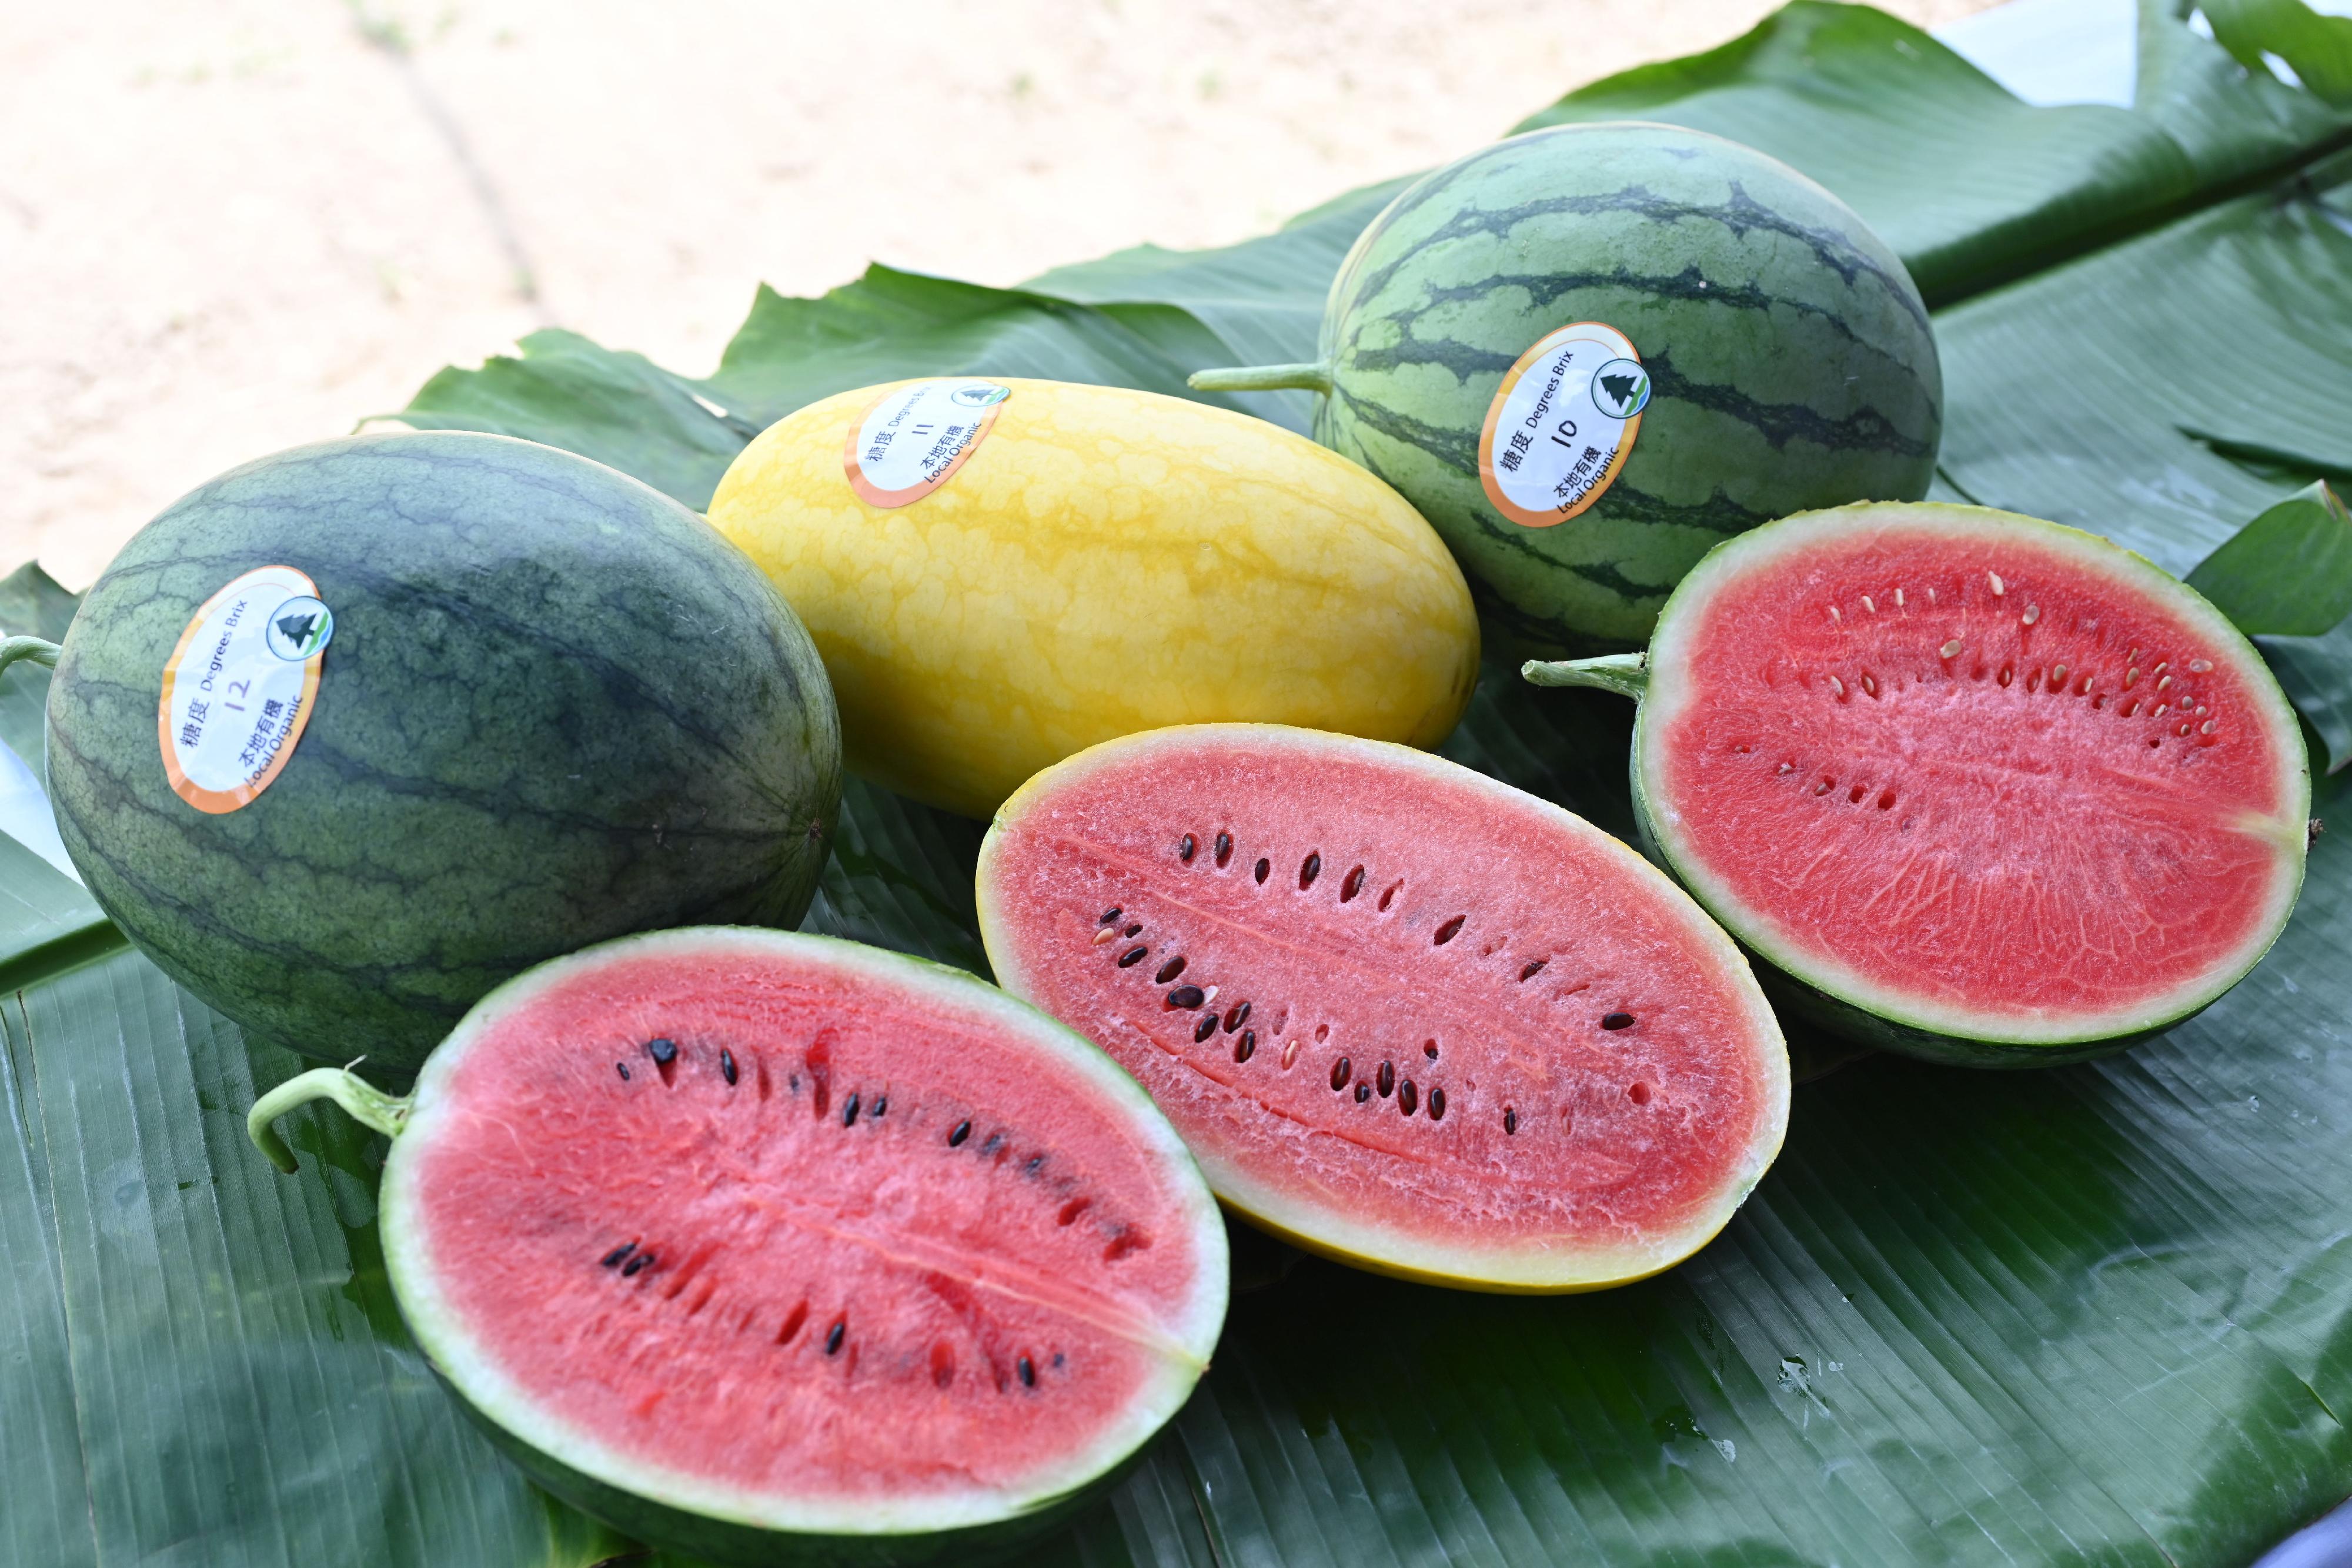 The Agriculture, Fisheries and Conservation Department today (June 29) introduced three highlighted varieties of organic watermelons for the Local Organic Watermelon Festival. Photo shows those varieties with sweetness labels, namely Super Sweet Black Angel 168 (left), Diana (centre) and seedless 3F-2728 (right).